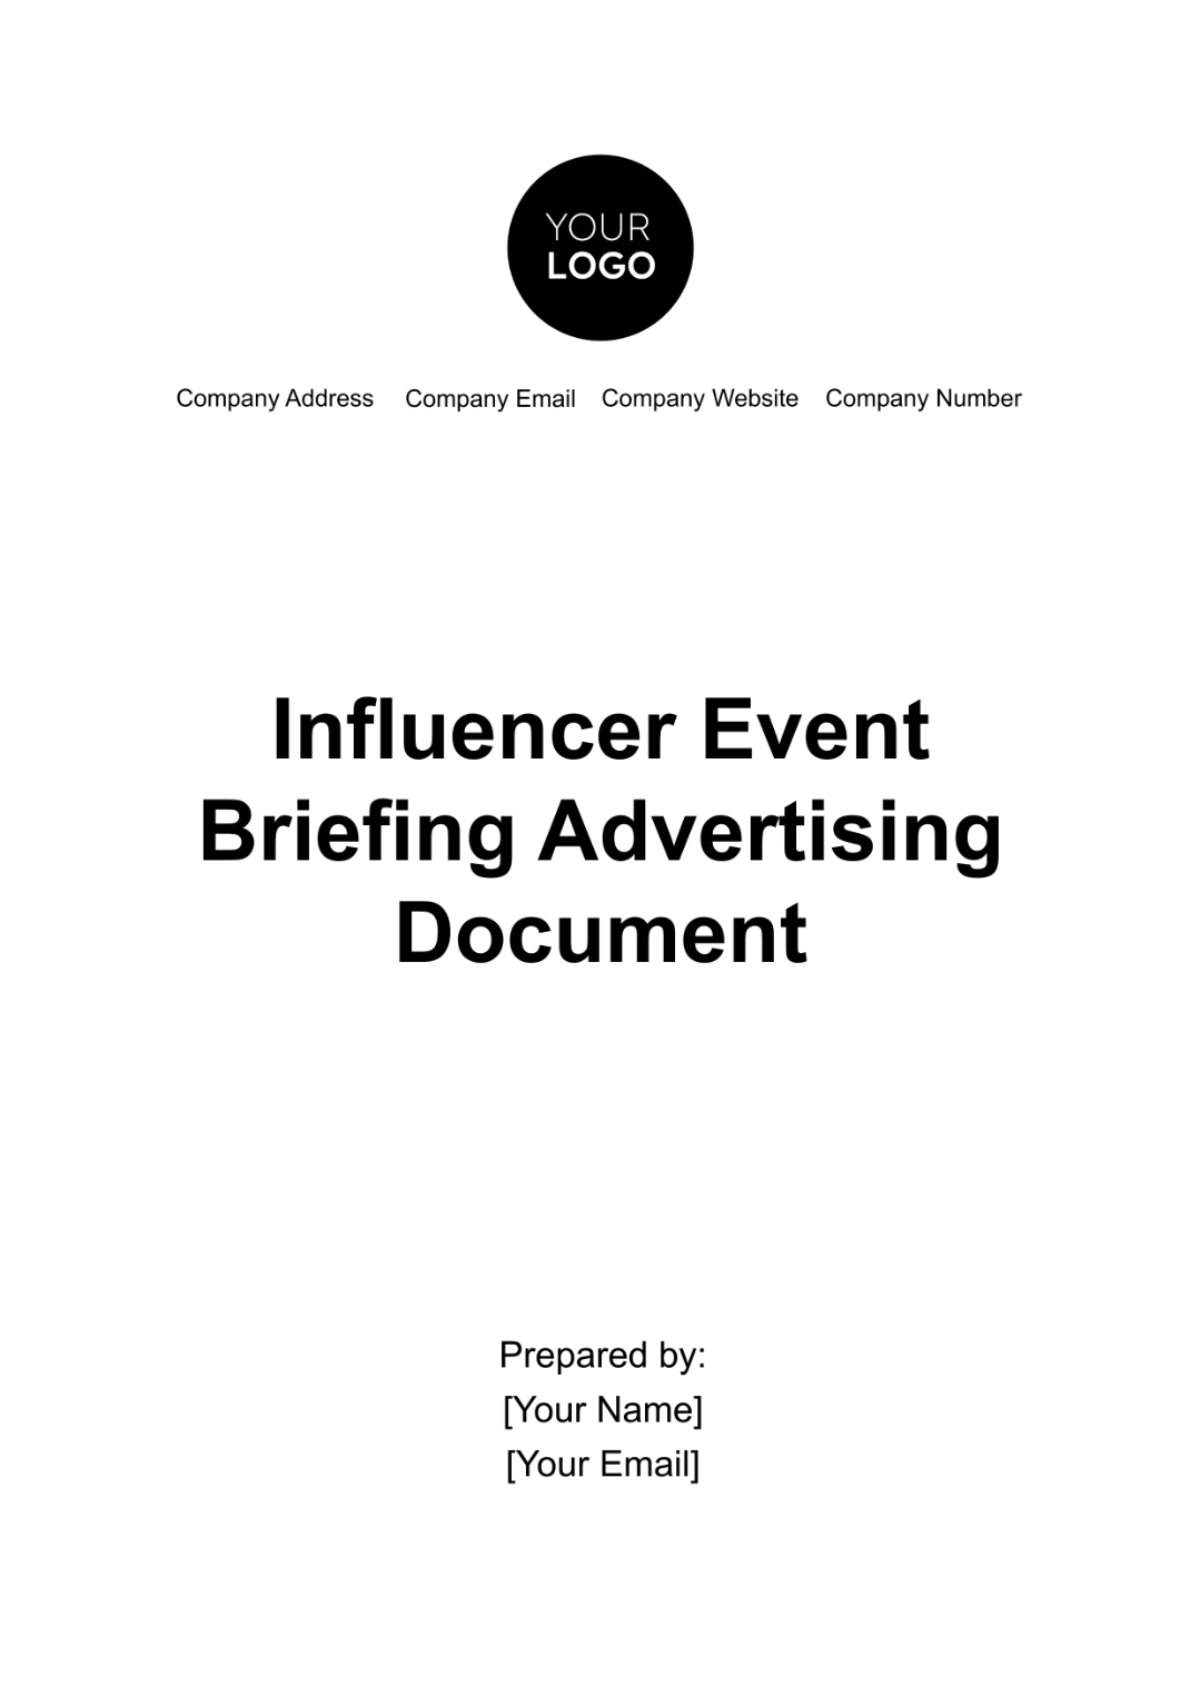 Free Influencer Event Briefing Advertising Document Template